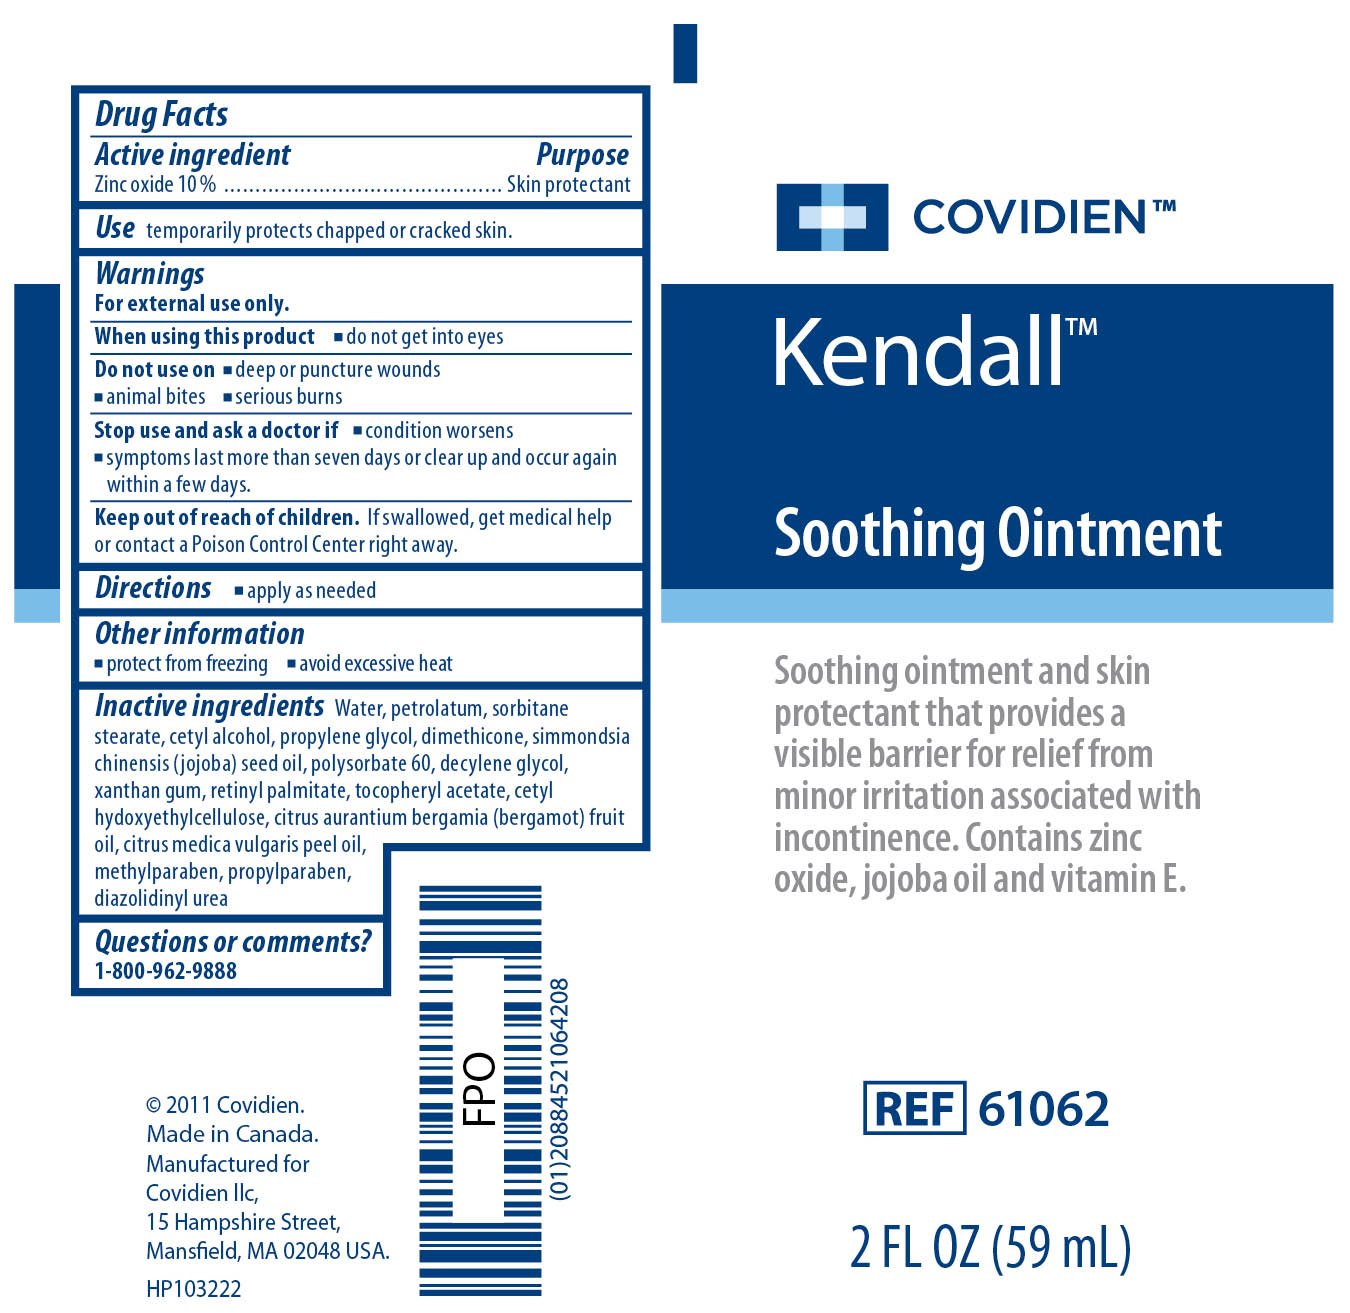 Image of Kendall Soothing Ointment 2 Fl oz Label